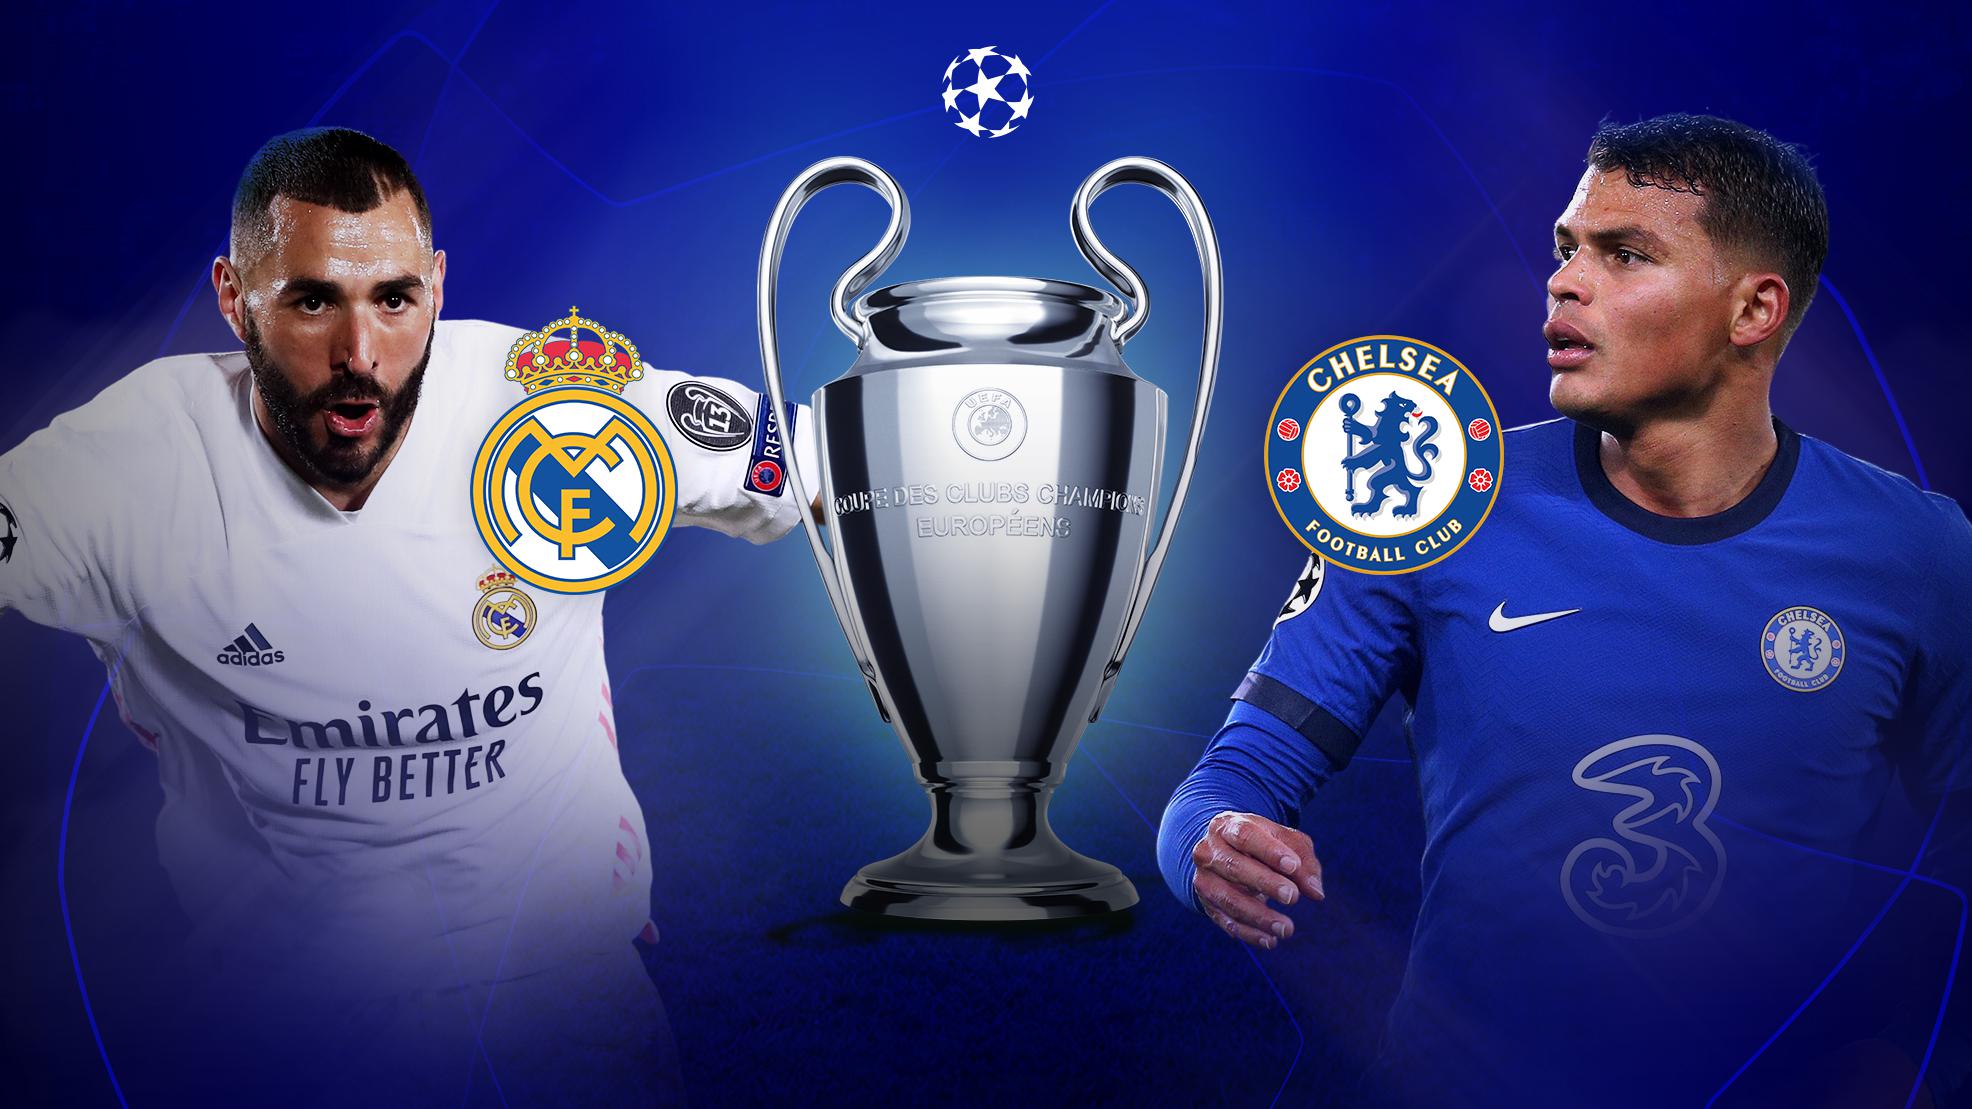 Real Madrid-Chelsea | Real Madrid vs Chelsea Champions League preview:  where to watch, line-ups, team news | UEFA Champions League | UEFA.com